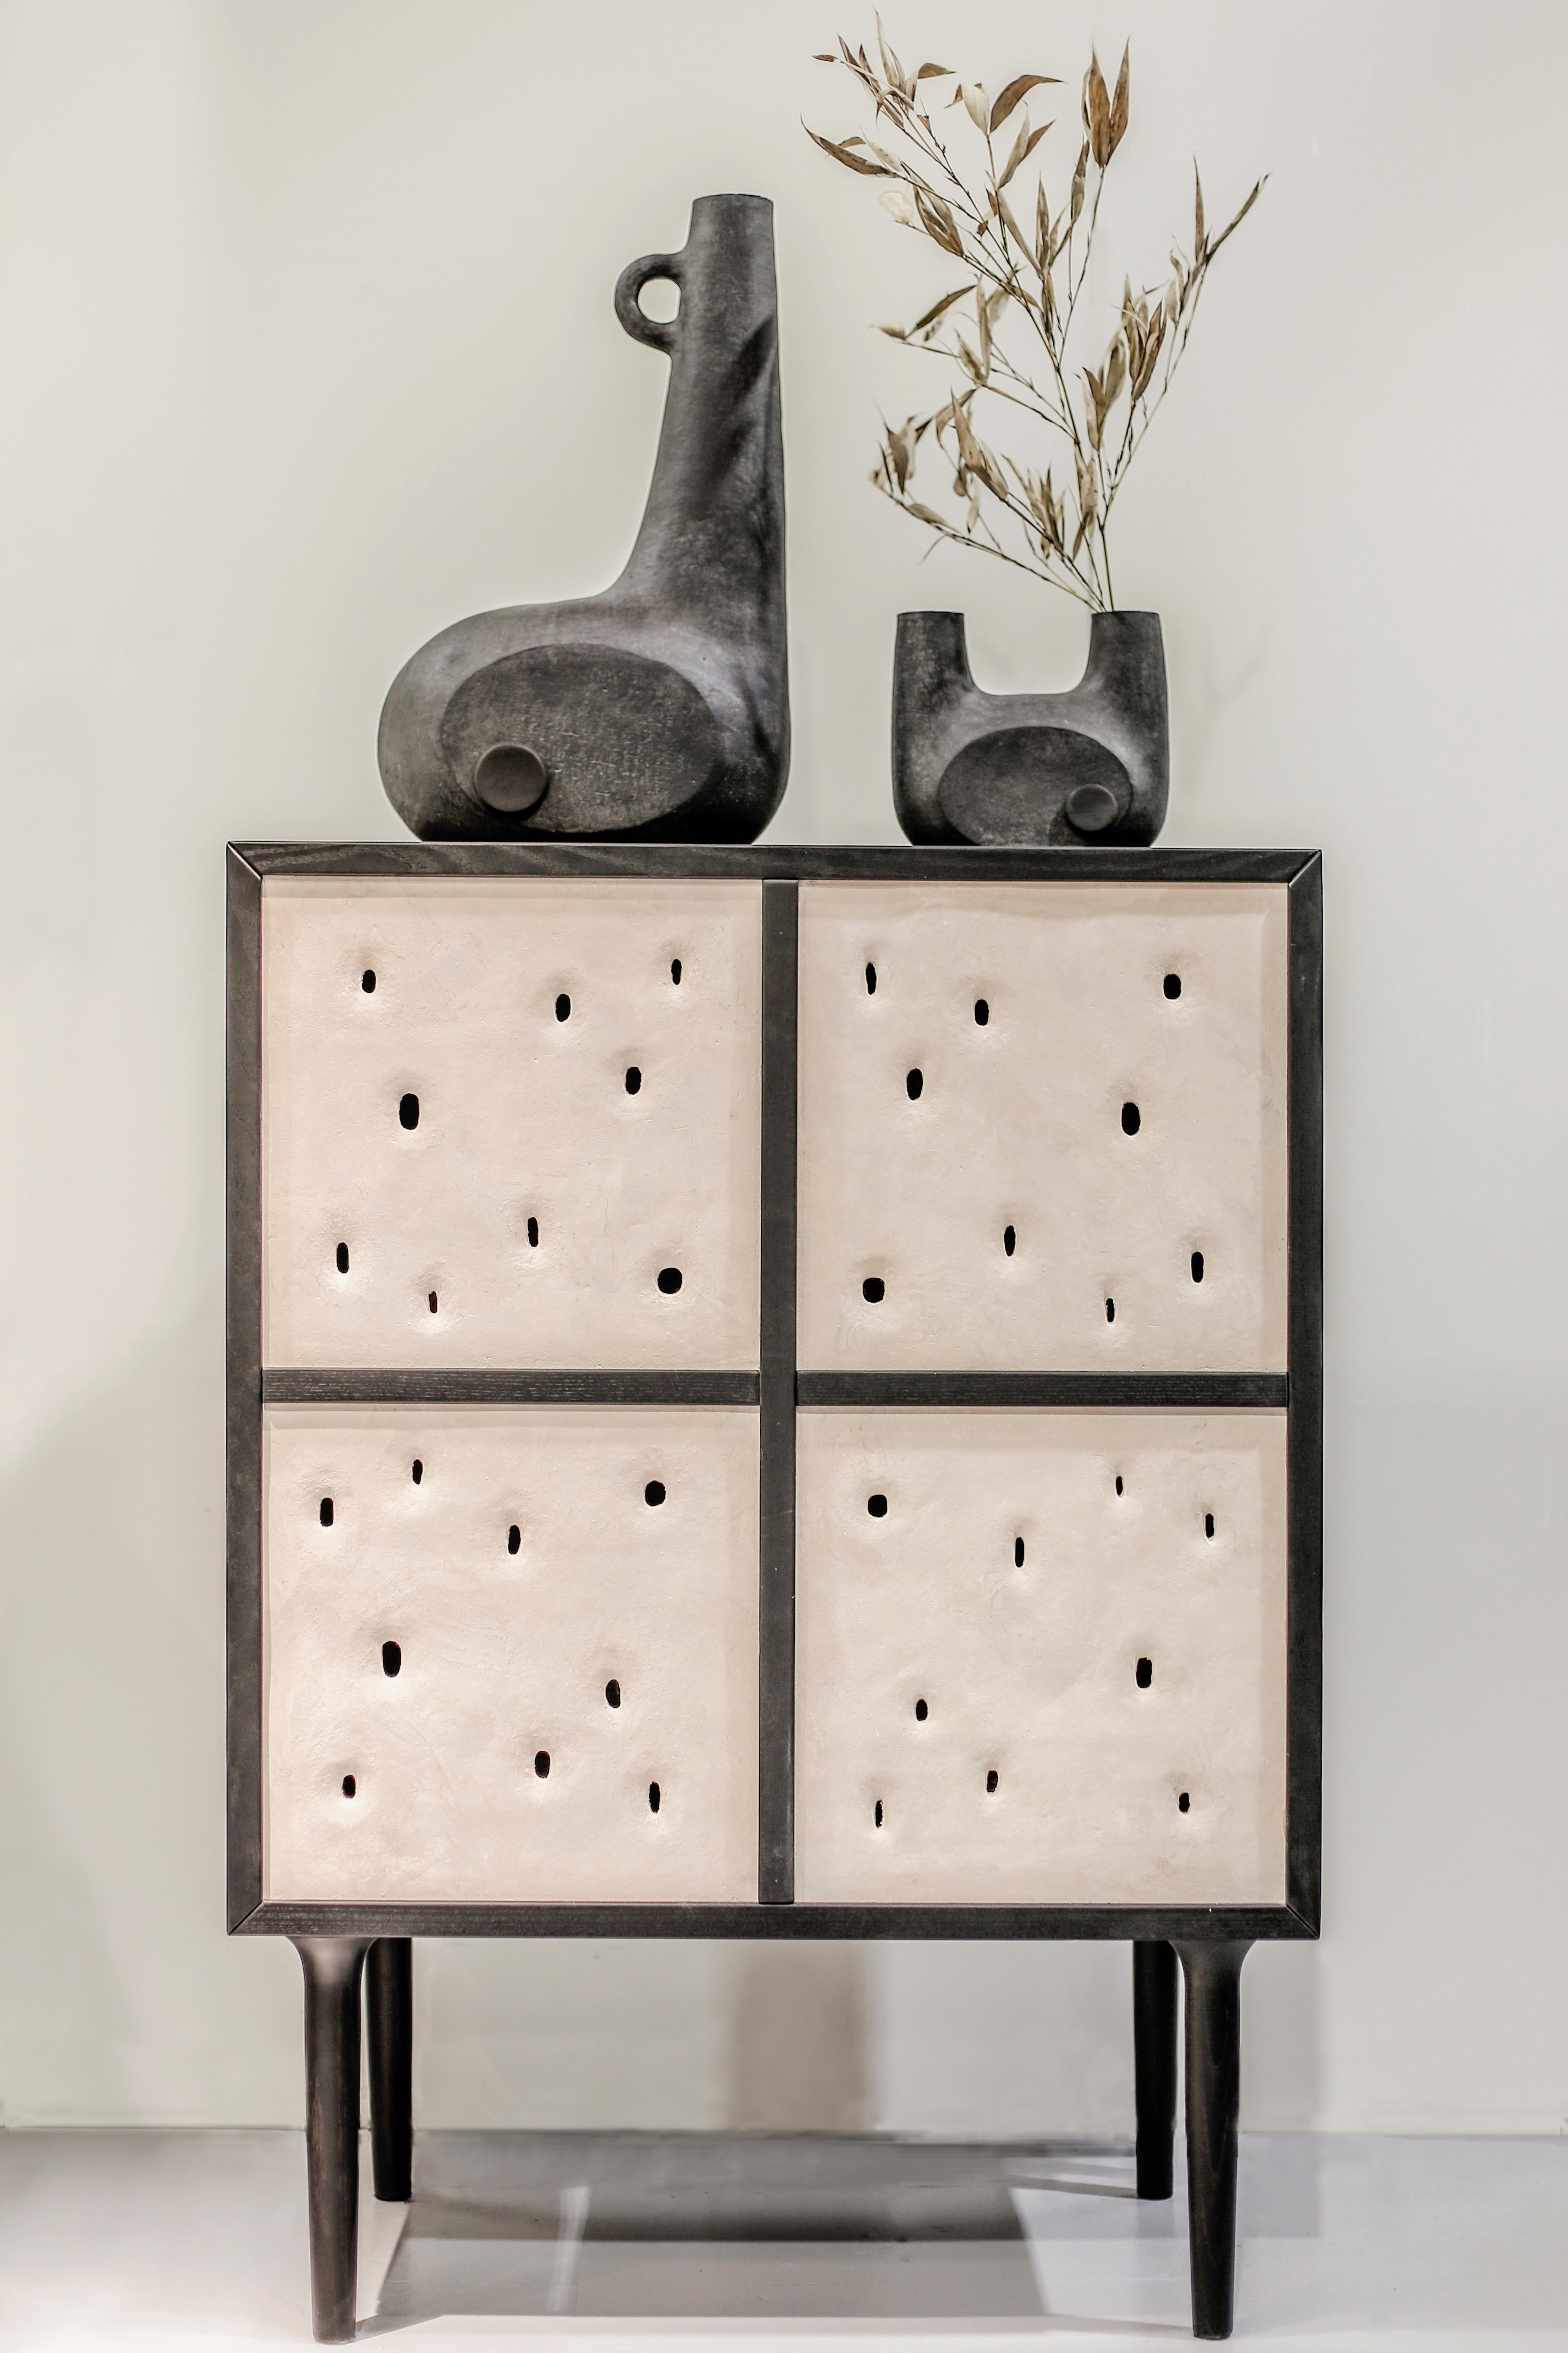 Ceramic contemporary bar cabinet by FAINA
Design: Victoriya Yakusha
Material: clay, ash
Dimensions: 76 x 44.3 x H 106 cm

Made in the style of ethnic minimalism, the collection items introduce “naive design”- simple in form, yet with a deep